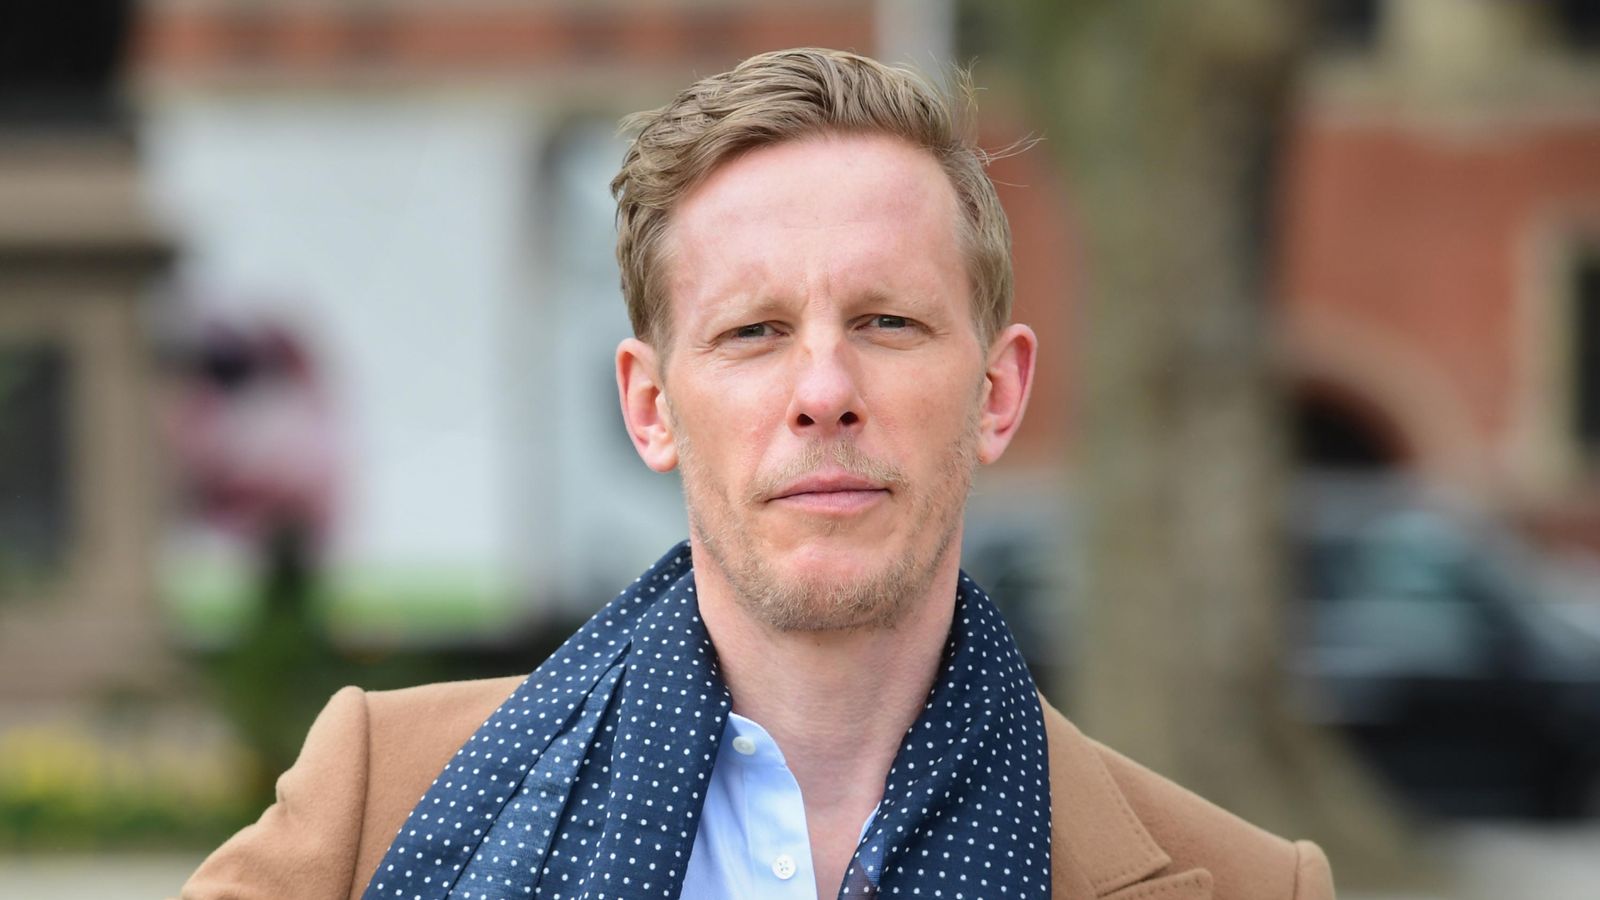 Laurence Fox's 'misogynistic' comments about journalist on GB News broke broadcasting rules, Ofcom says